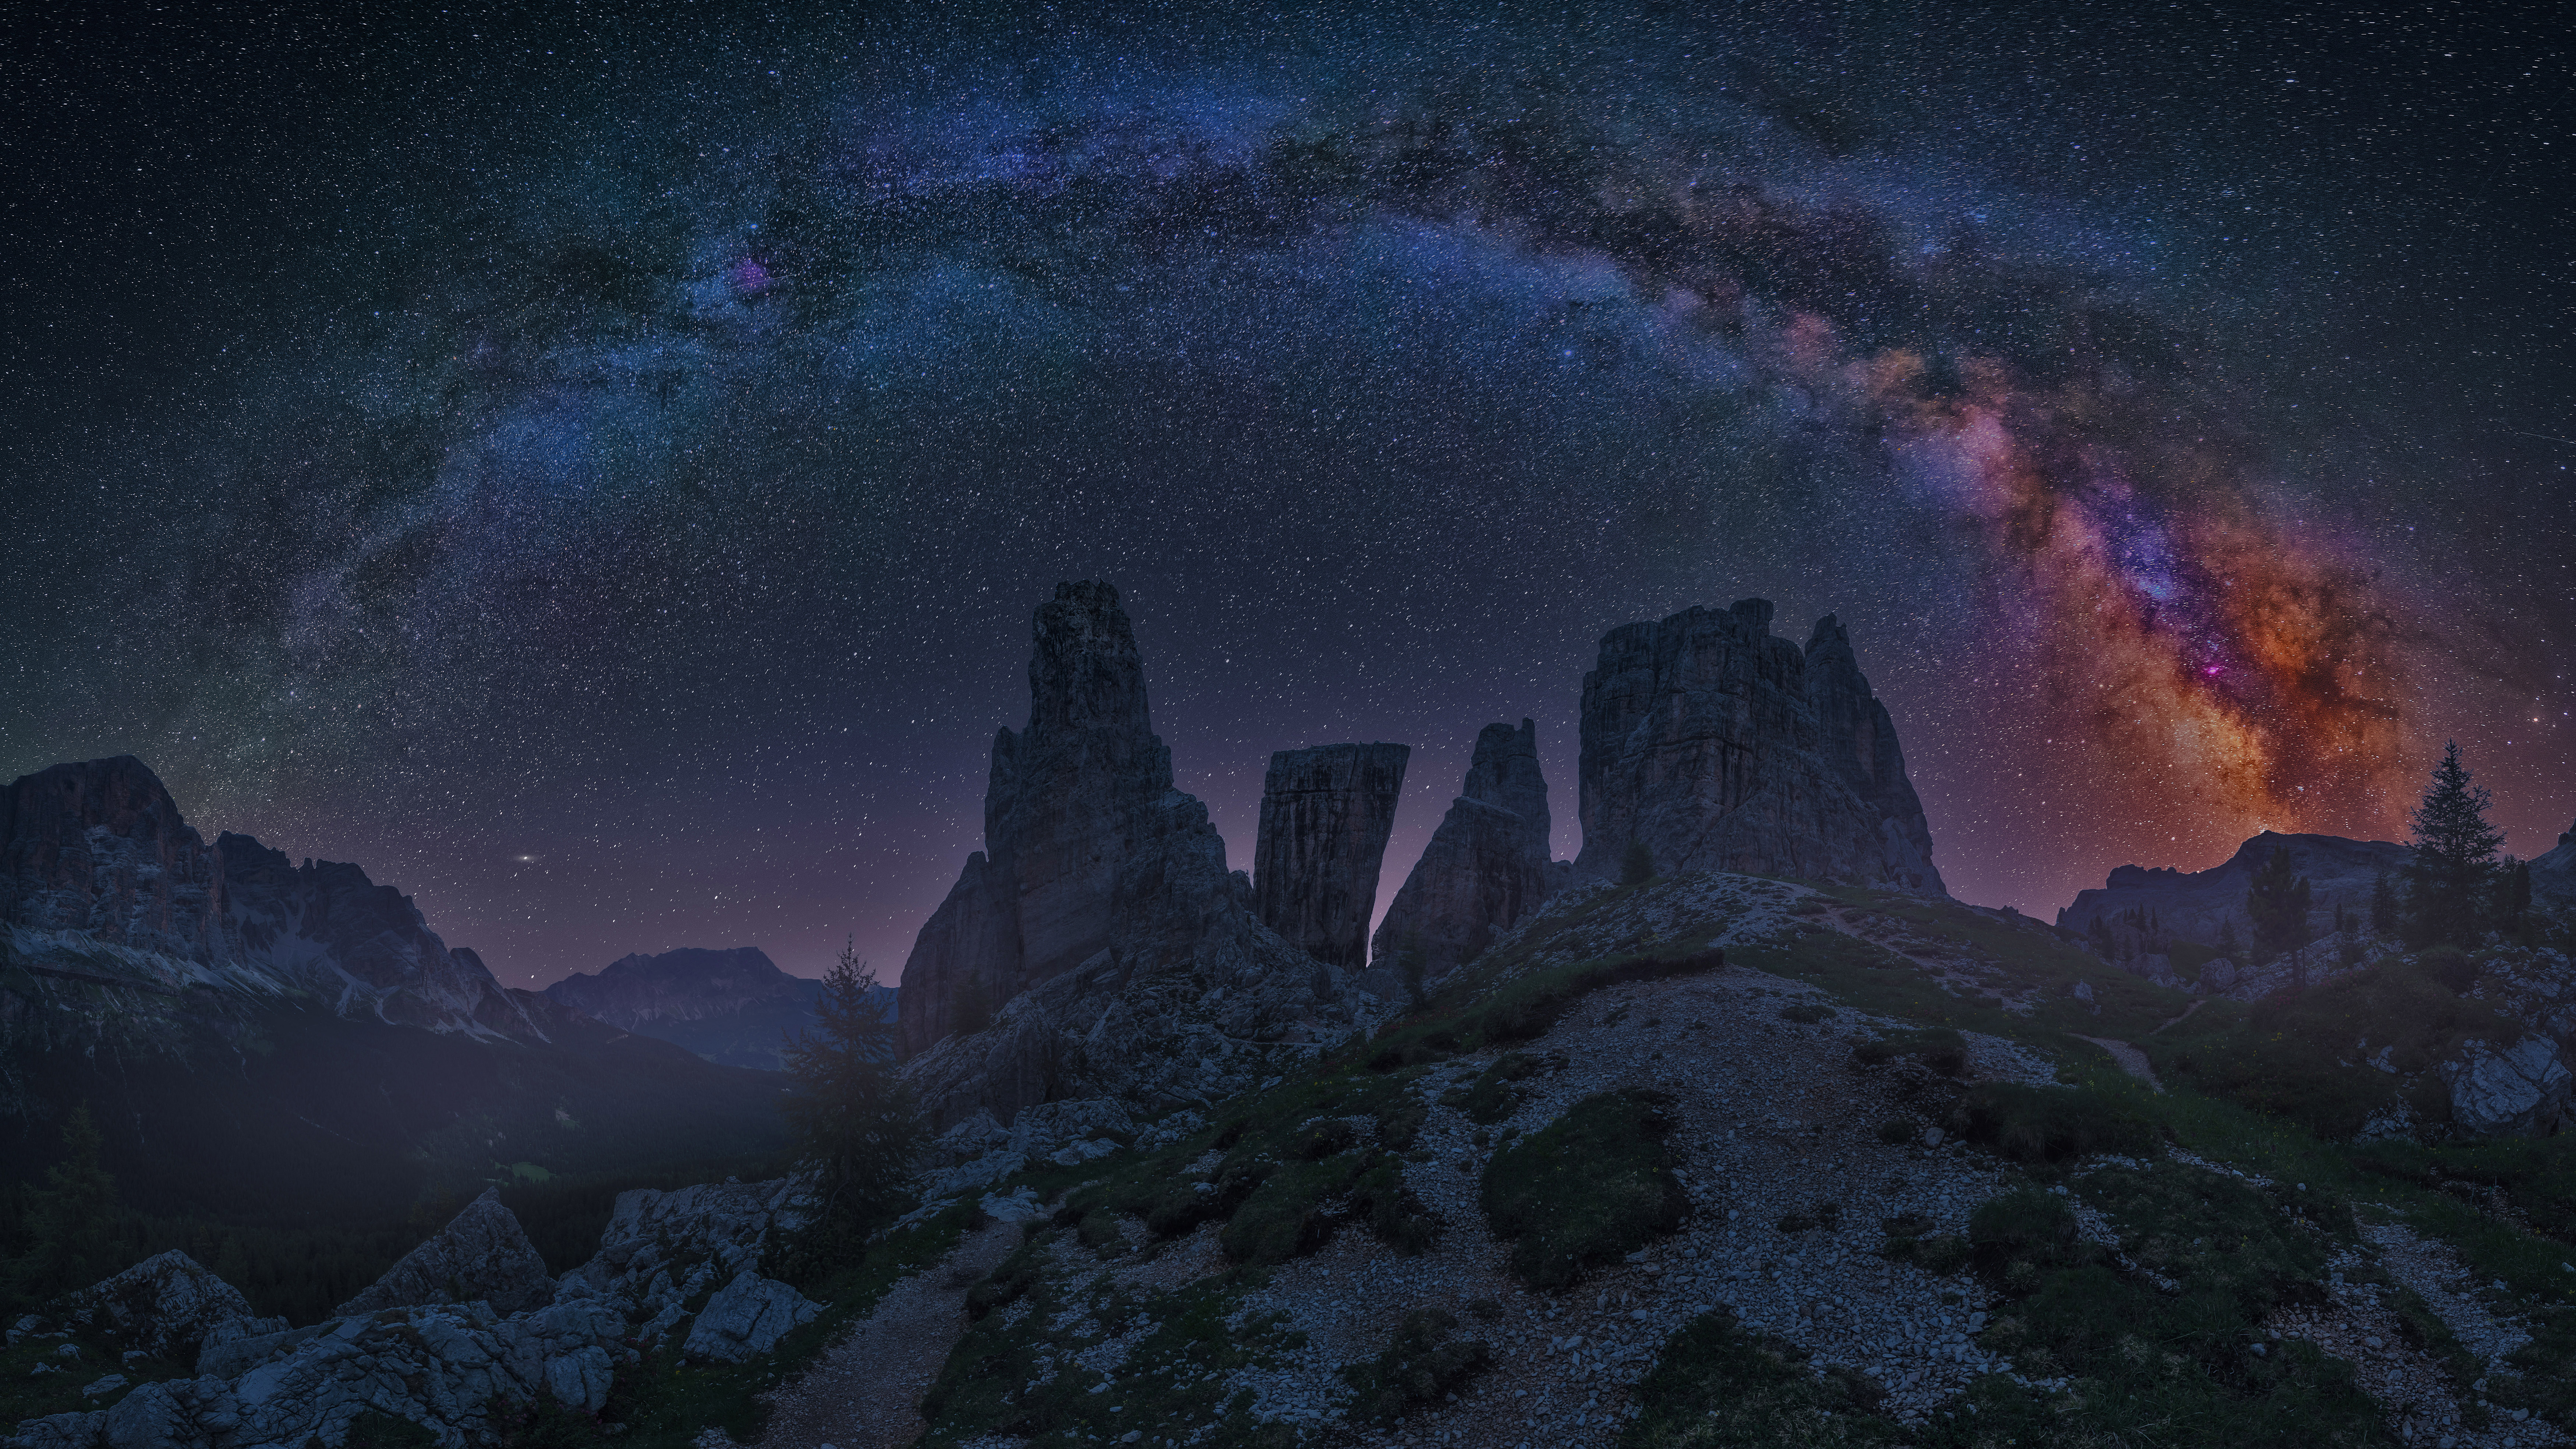 Dolomite Mountains at night with the Milky Way, Italy by Carlos Fernandez